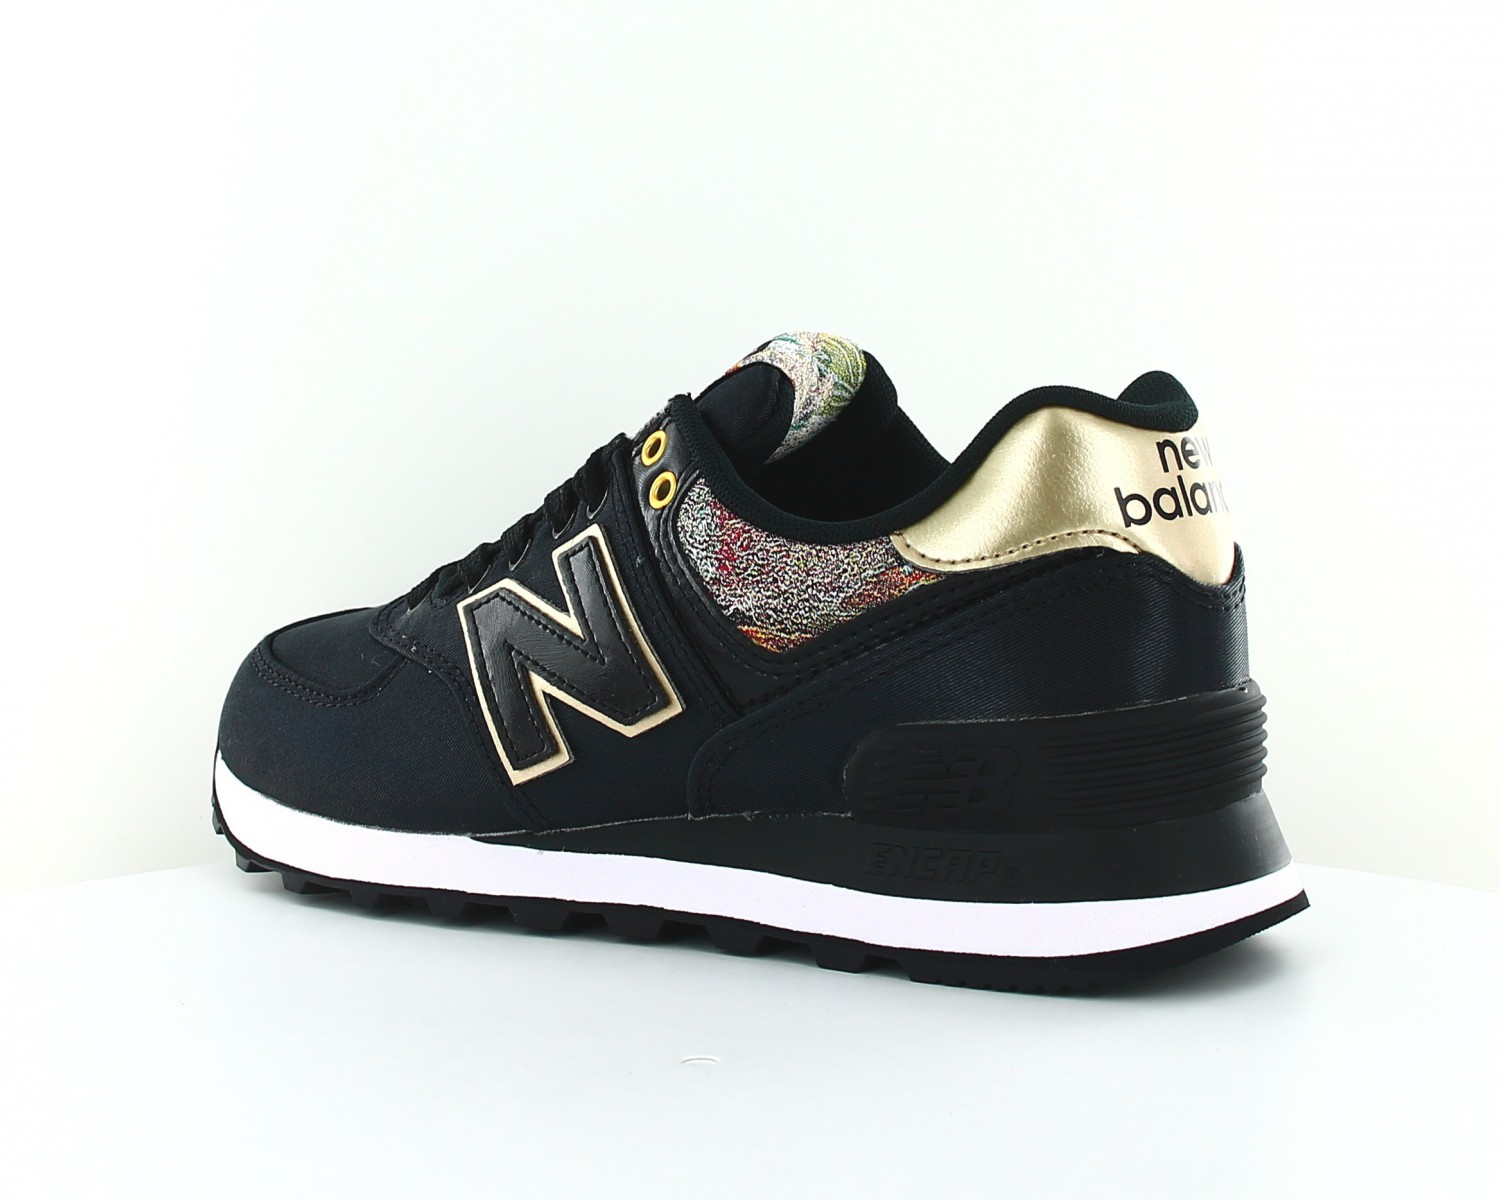 basket noire new balance femme, OFF 75%,where to buy!